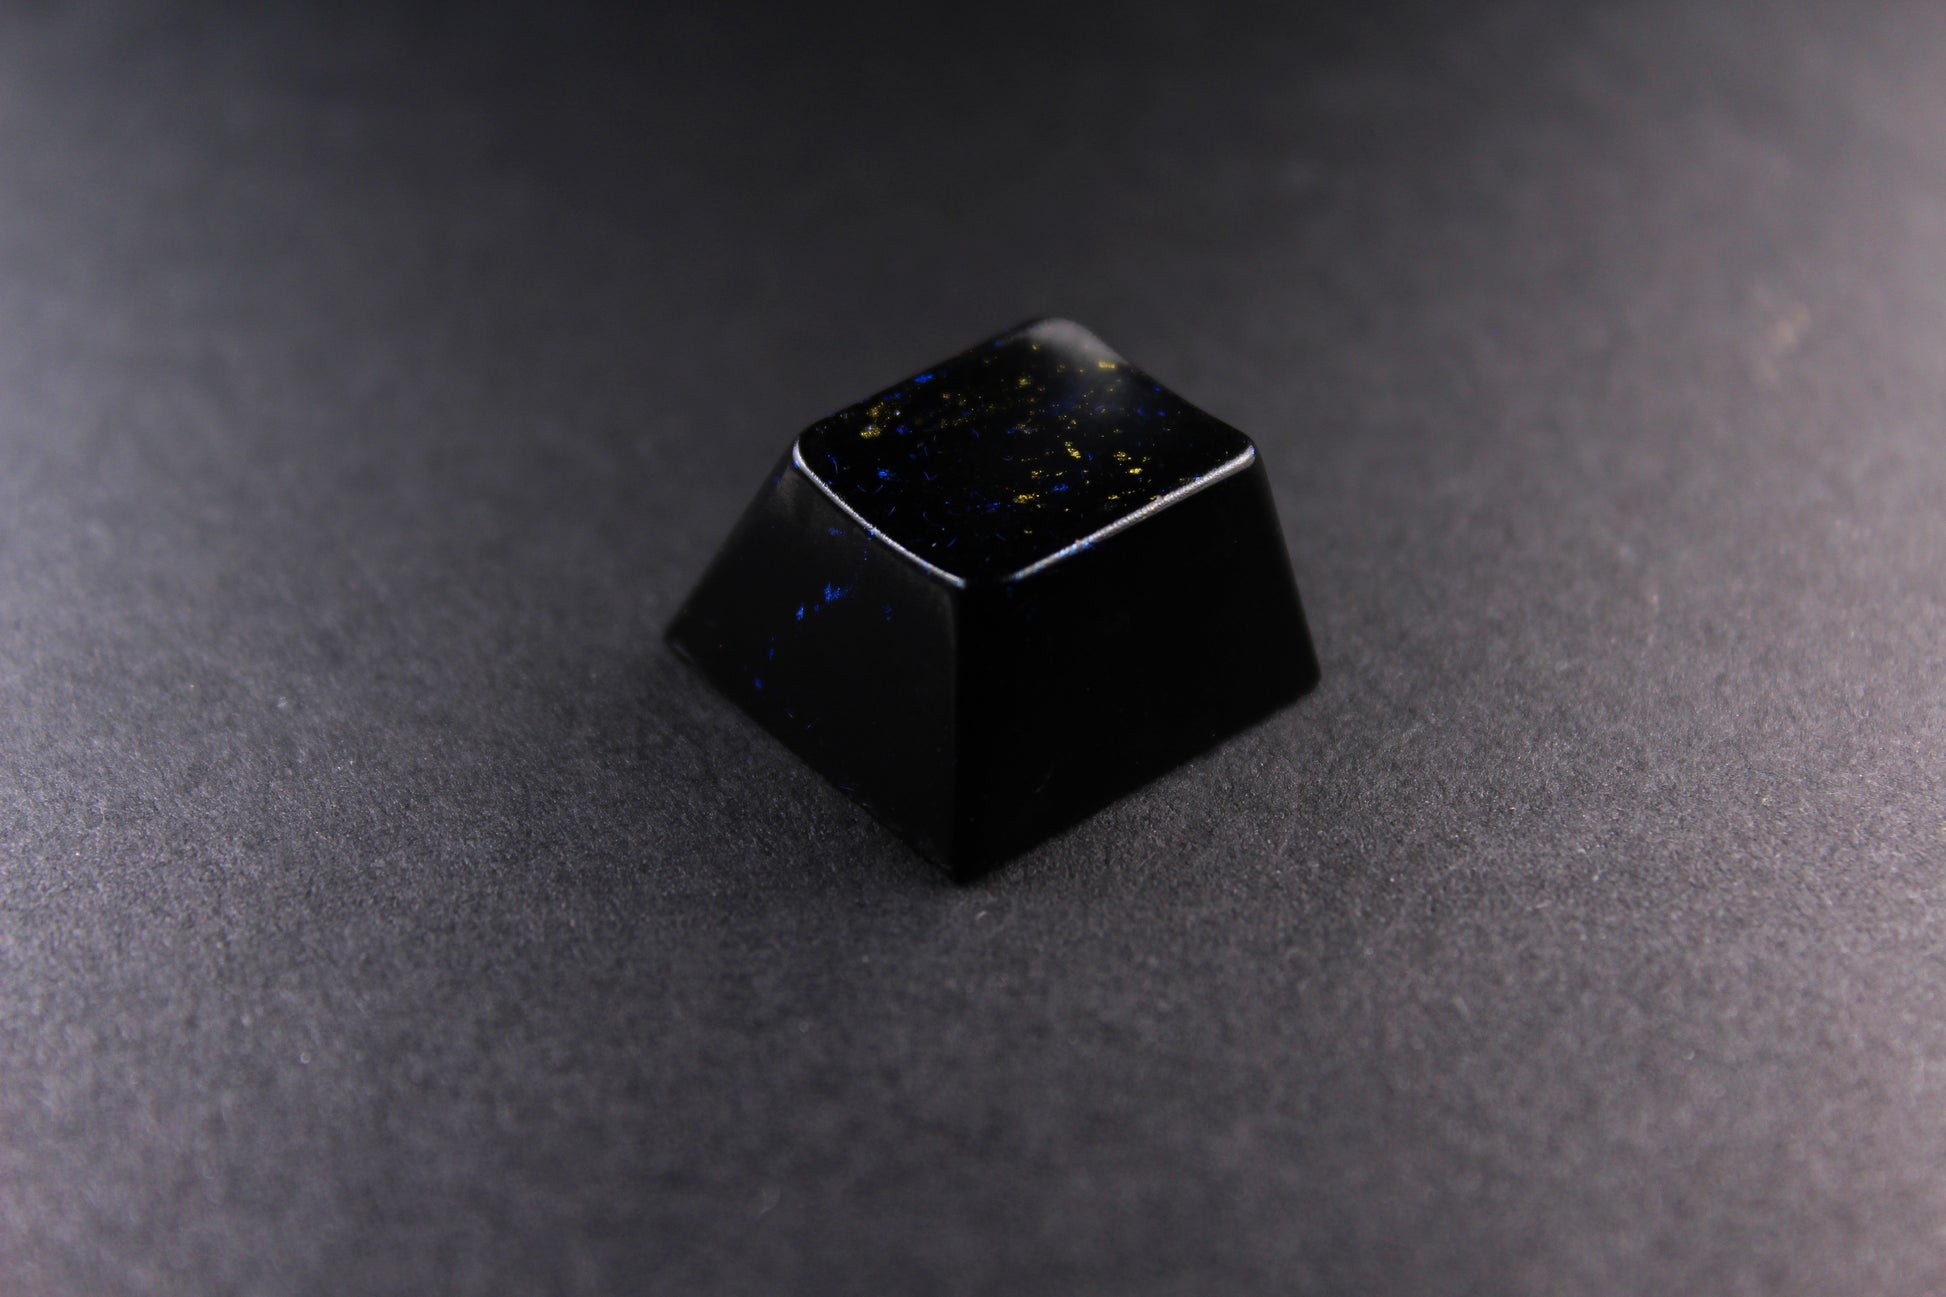 Cherry Esc - The void 3 - PrimeCaps Keycap - Blank and Sculpted Artisan Keycaps for cherry MX mechanical keyboards 